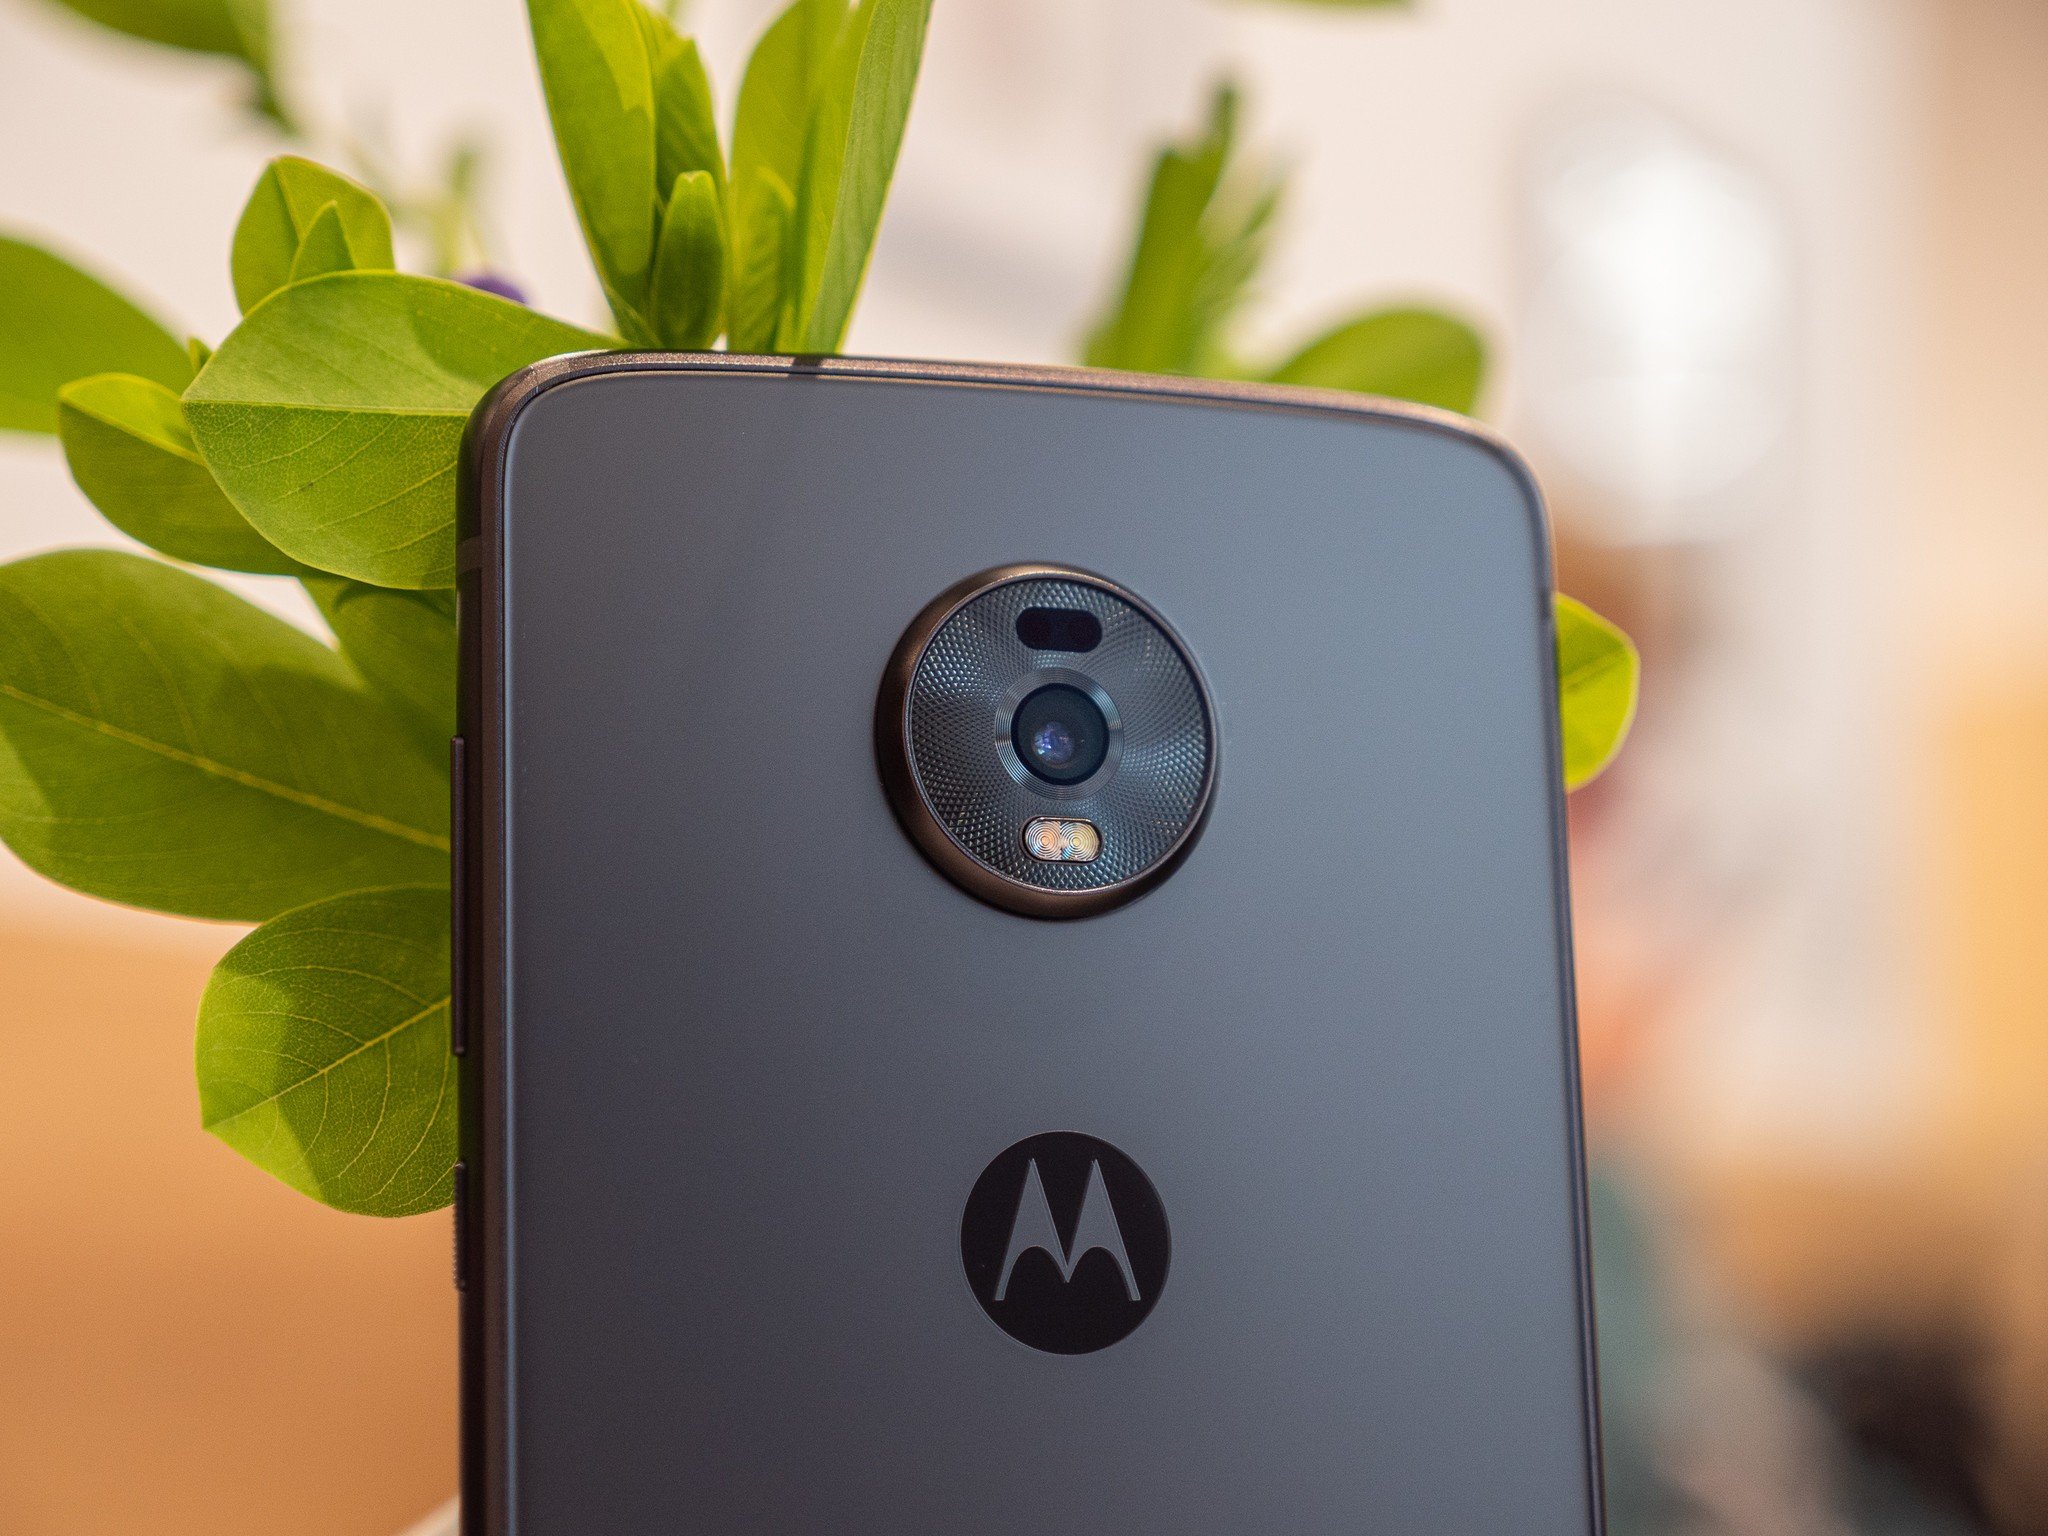 Moto Z4 Specifications: Snapdragon 675, 4GB RAM, 48MP camera, and Moto Mod  support in 2019